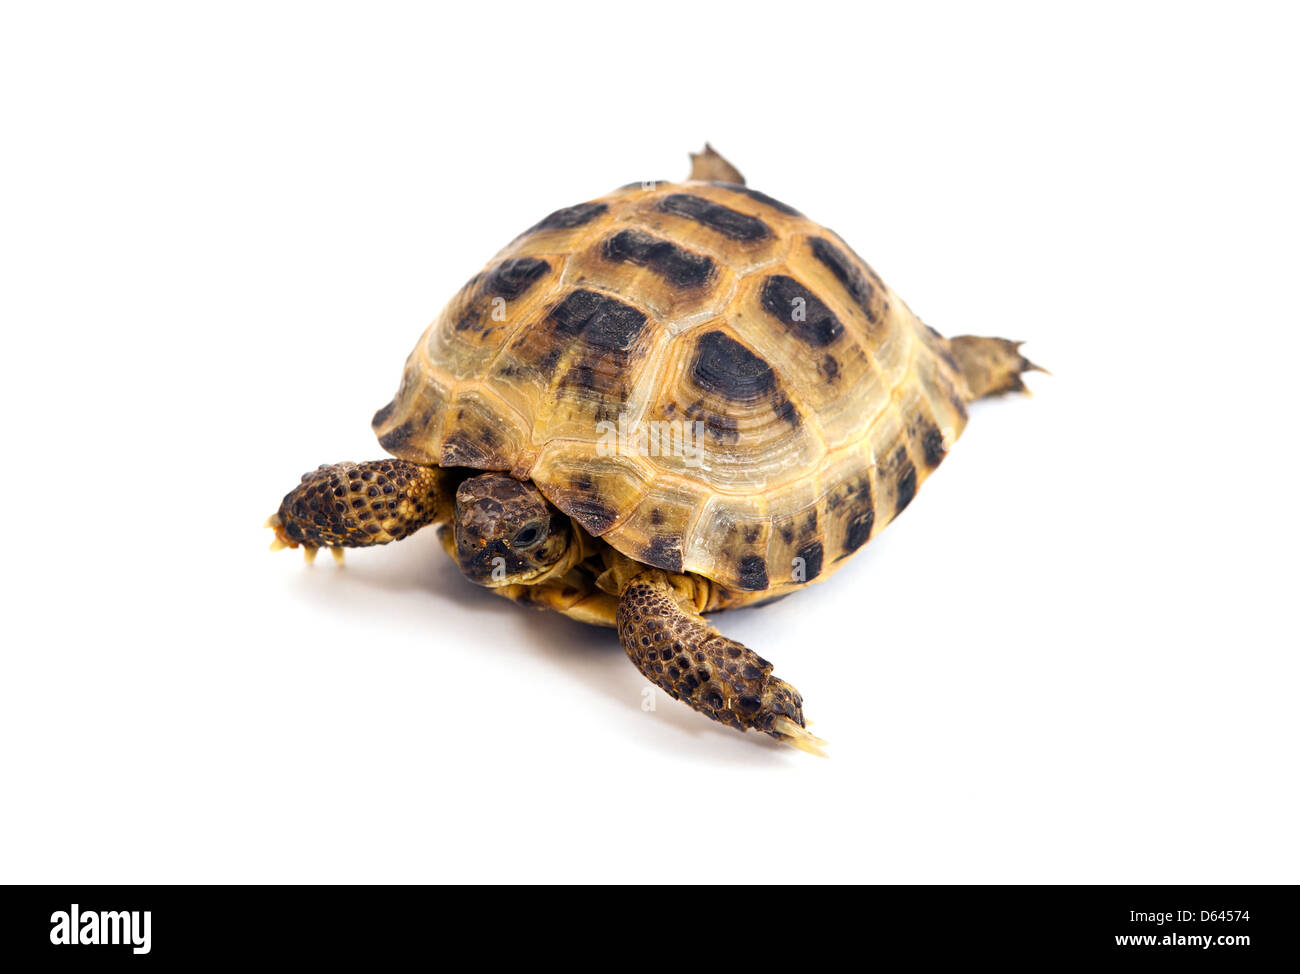 Asian or Russian tortoise Stock Photo